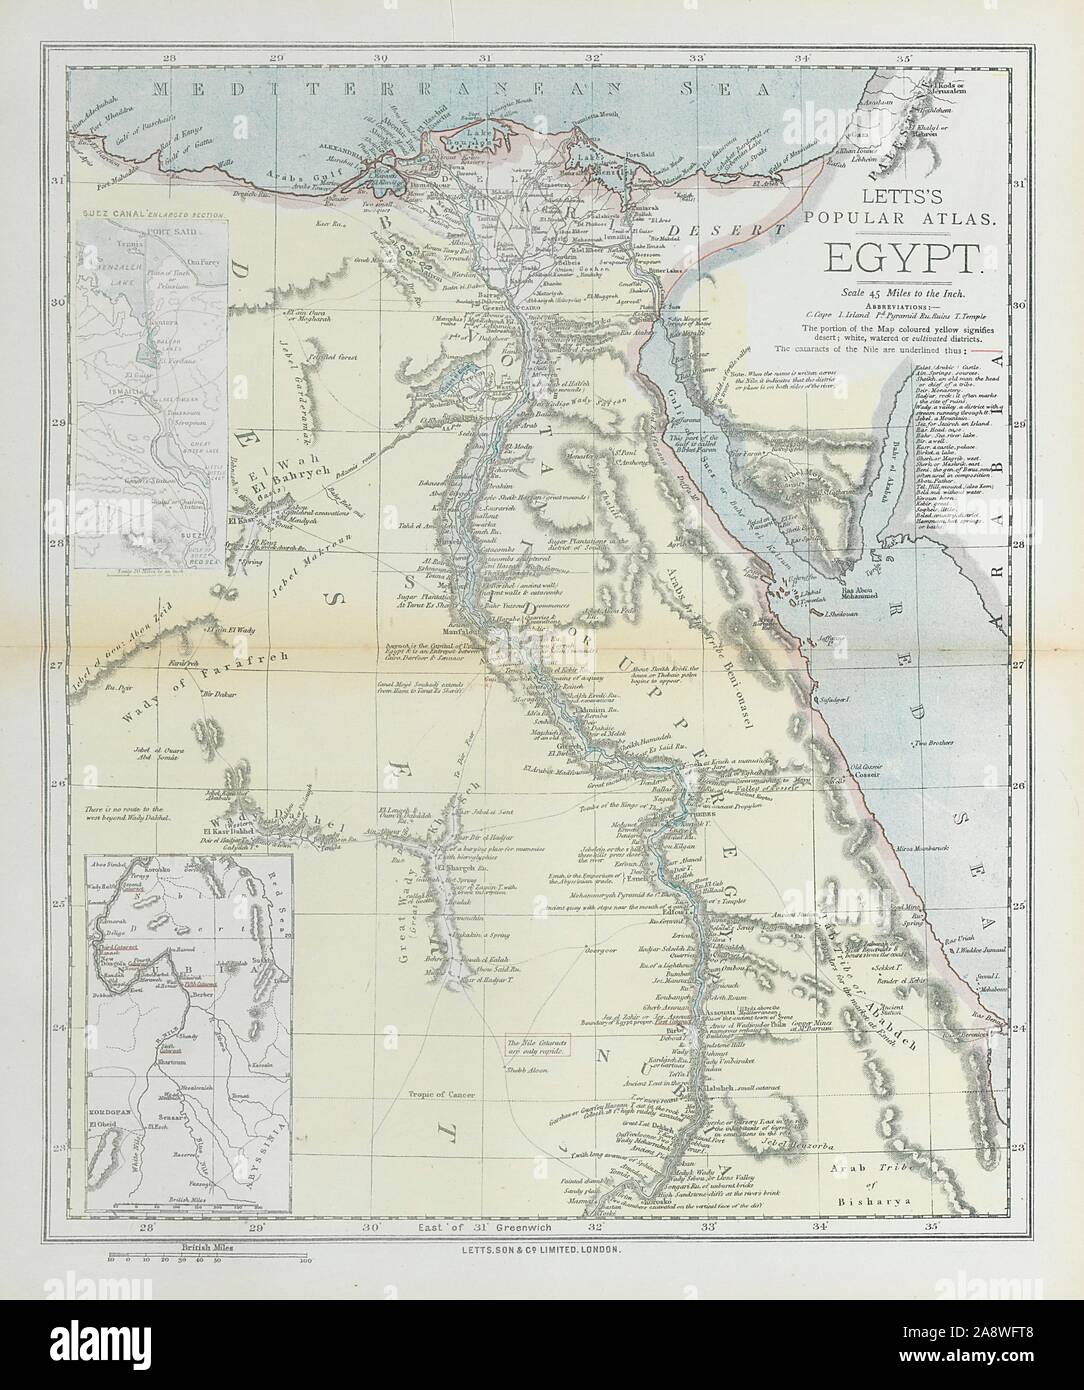 EGYPT. Nile valley. Suez Canal. Red Sea. 'Sherm'/Sharm el-Sheikh. LETTS 1883 map Stock Photo